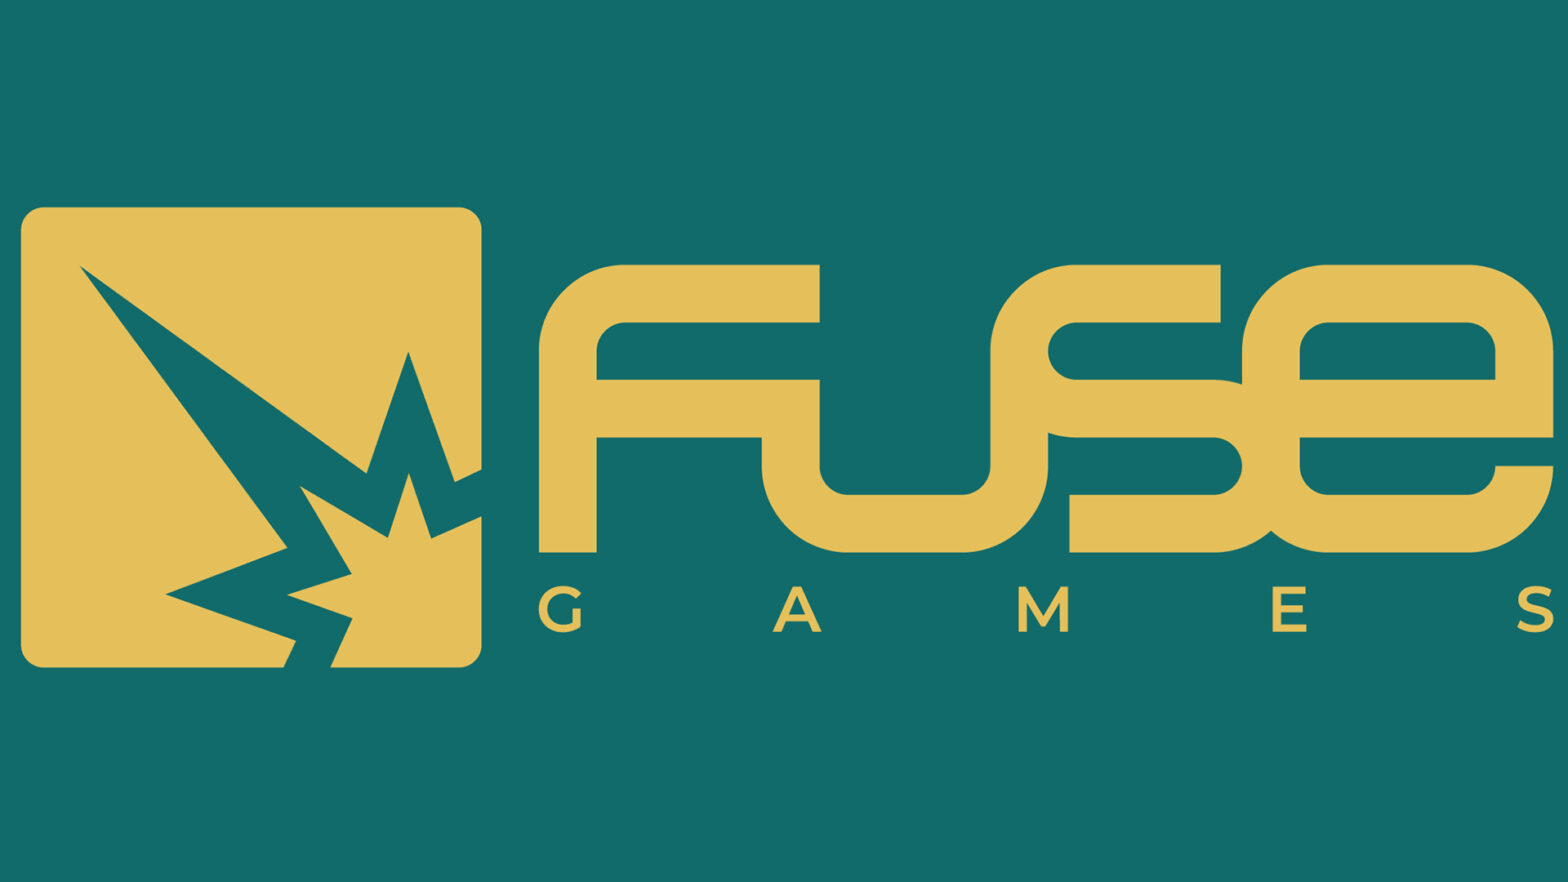 Former Need for Speed developers set up Fuse Games